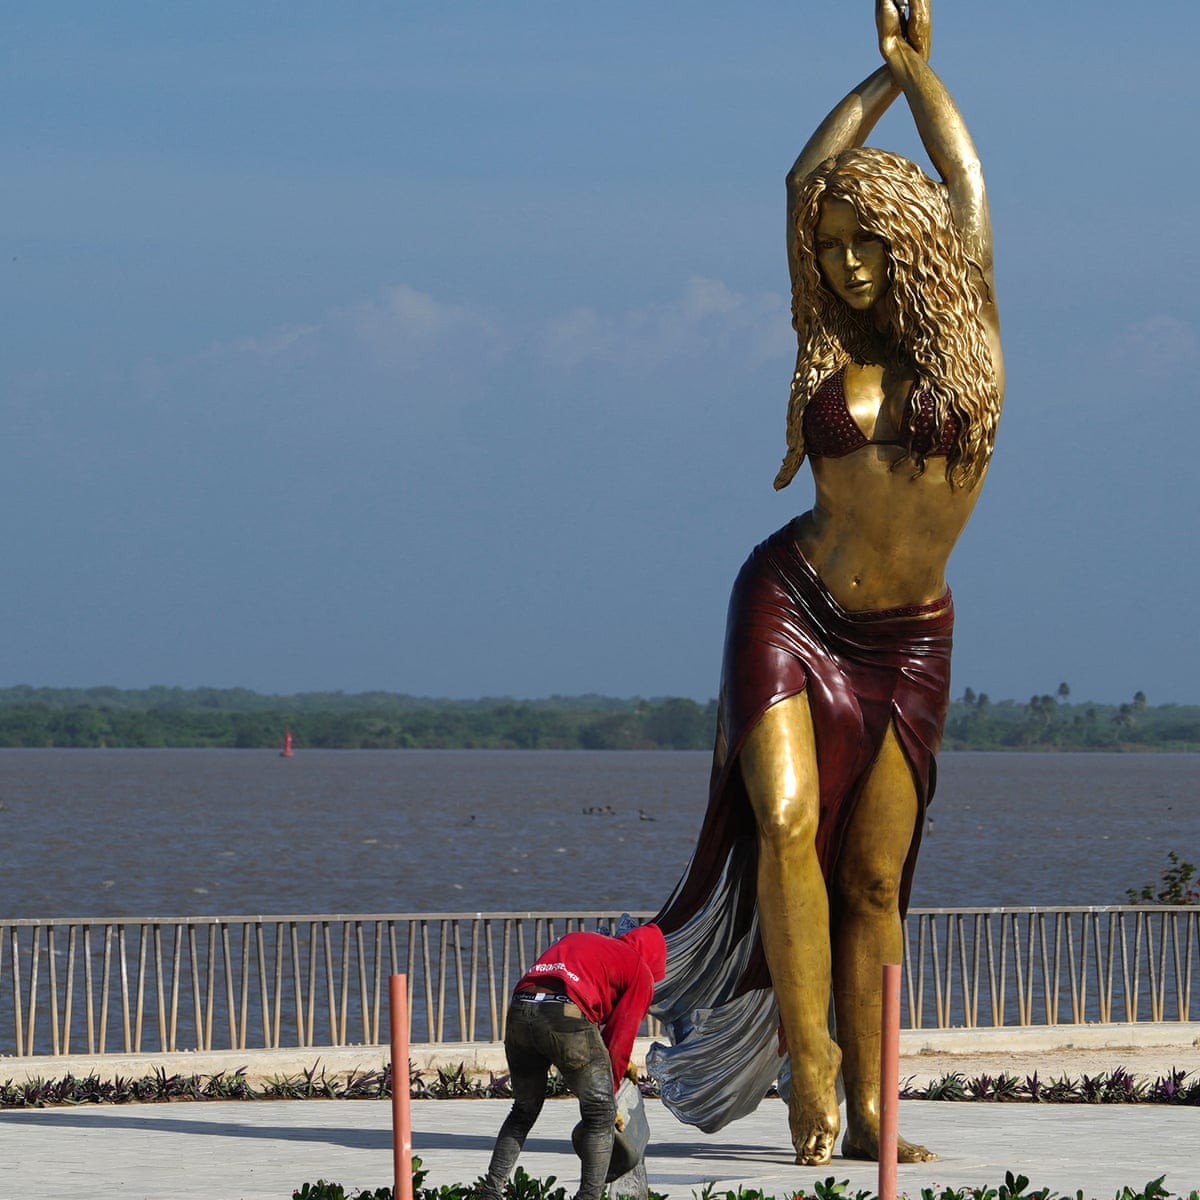 Nearly 21ft bronze statue of Shakira unveiled in her home town in Colombia, Shakira